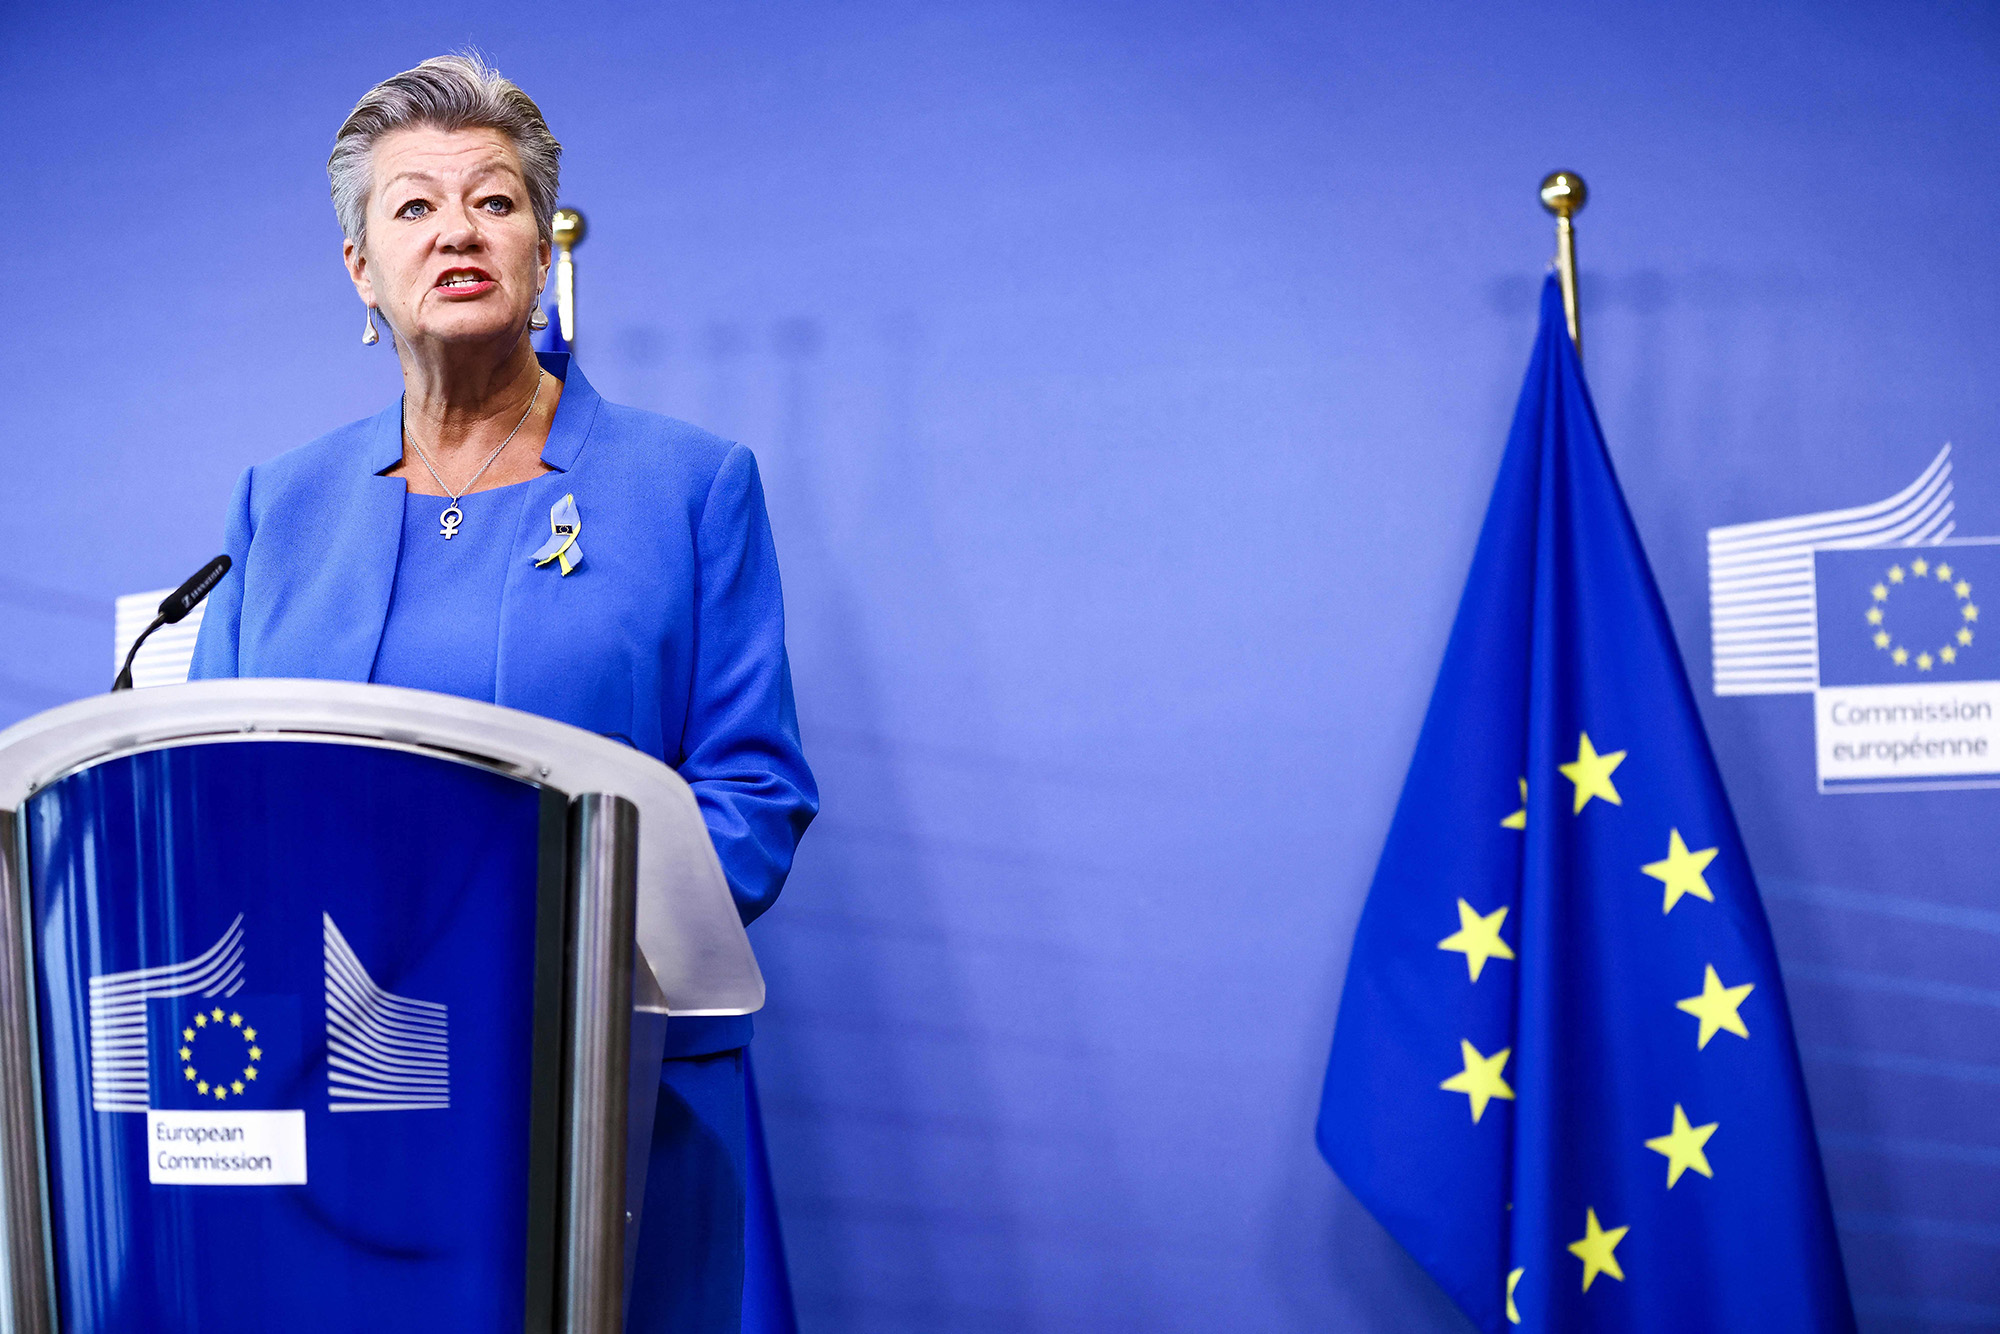 EU commissioner for Home Affairs Ylva Johansson addresses a press conference at EU headquarters in Brussels, Belgium, on September 6.